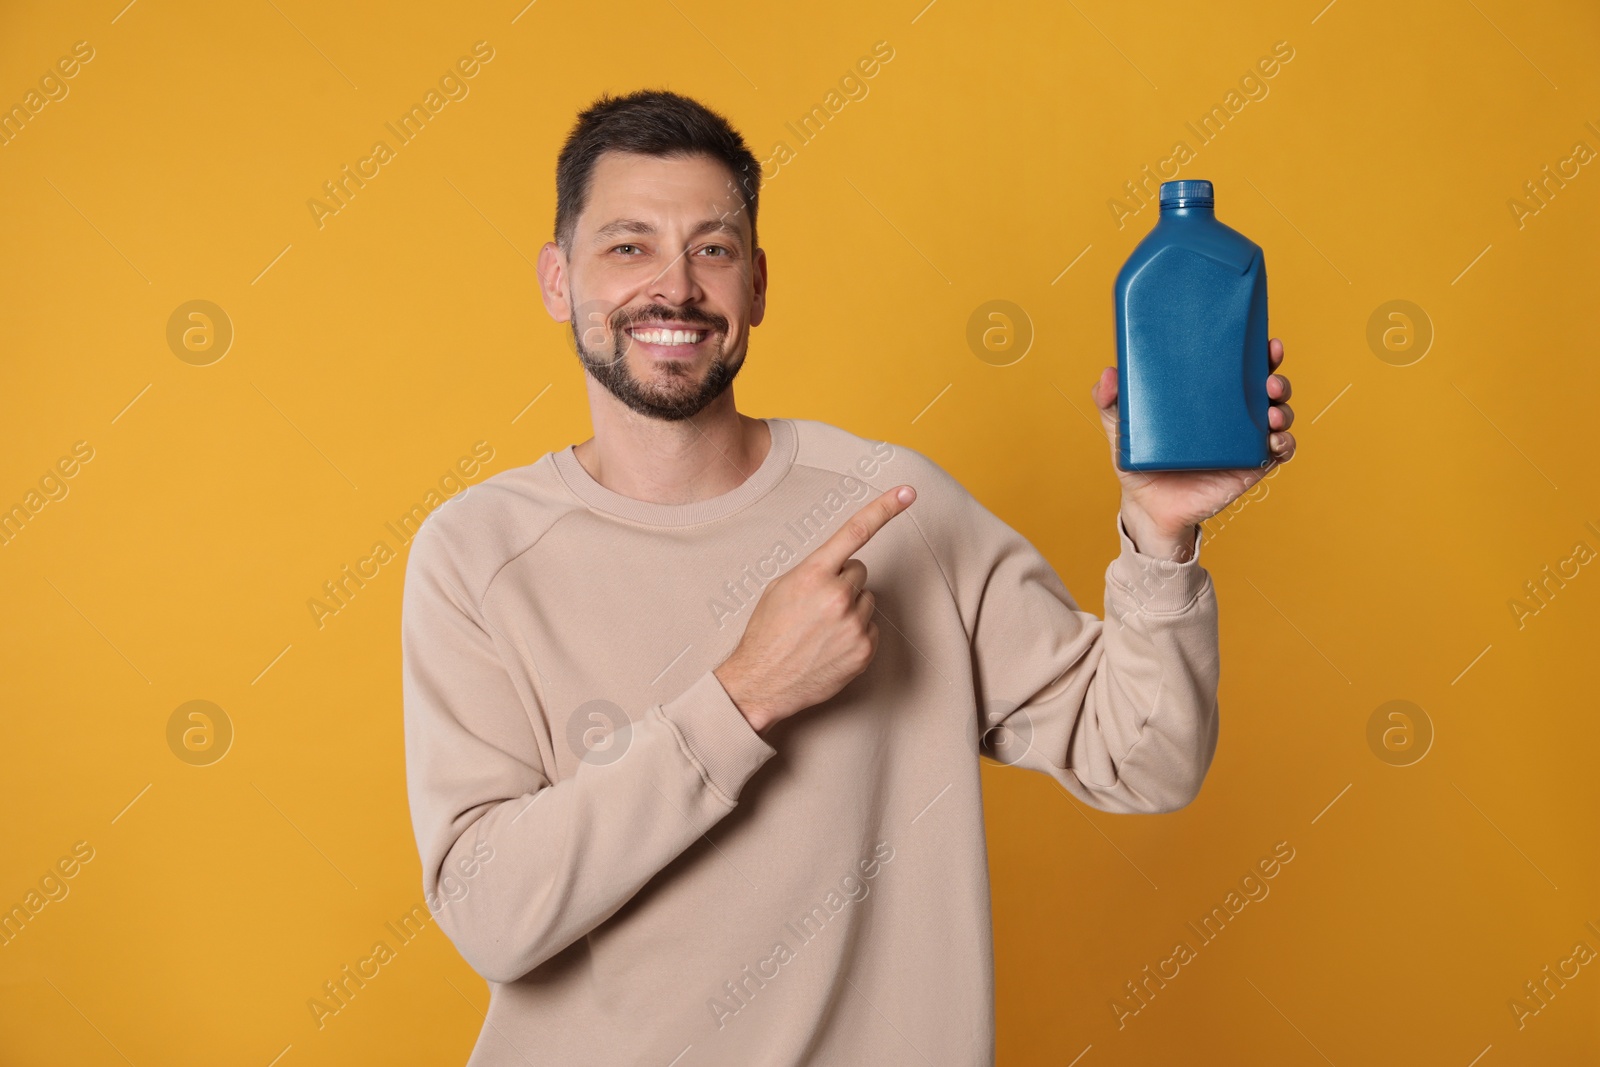 Photo of Man pointing at blue container of motor oil on orange background